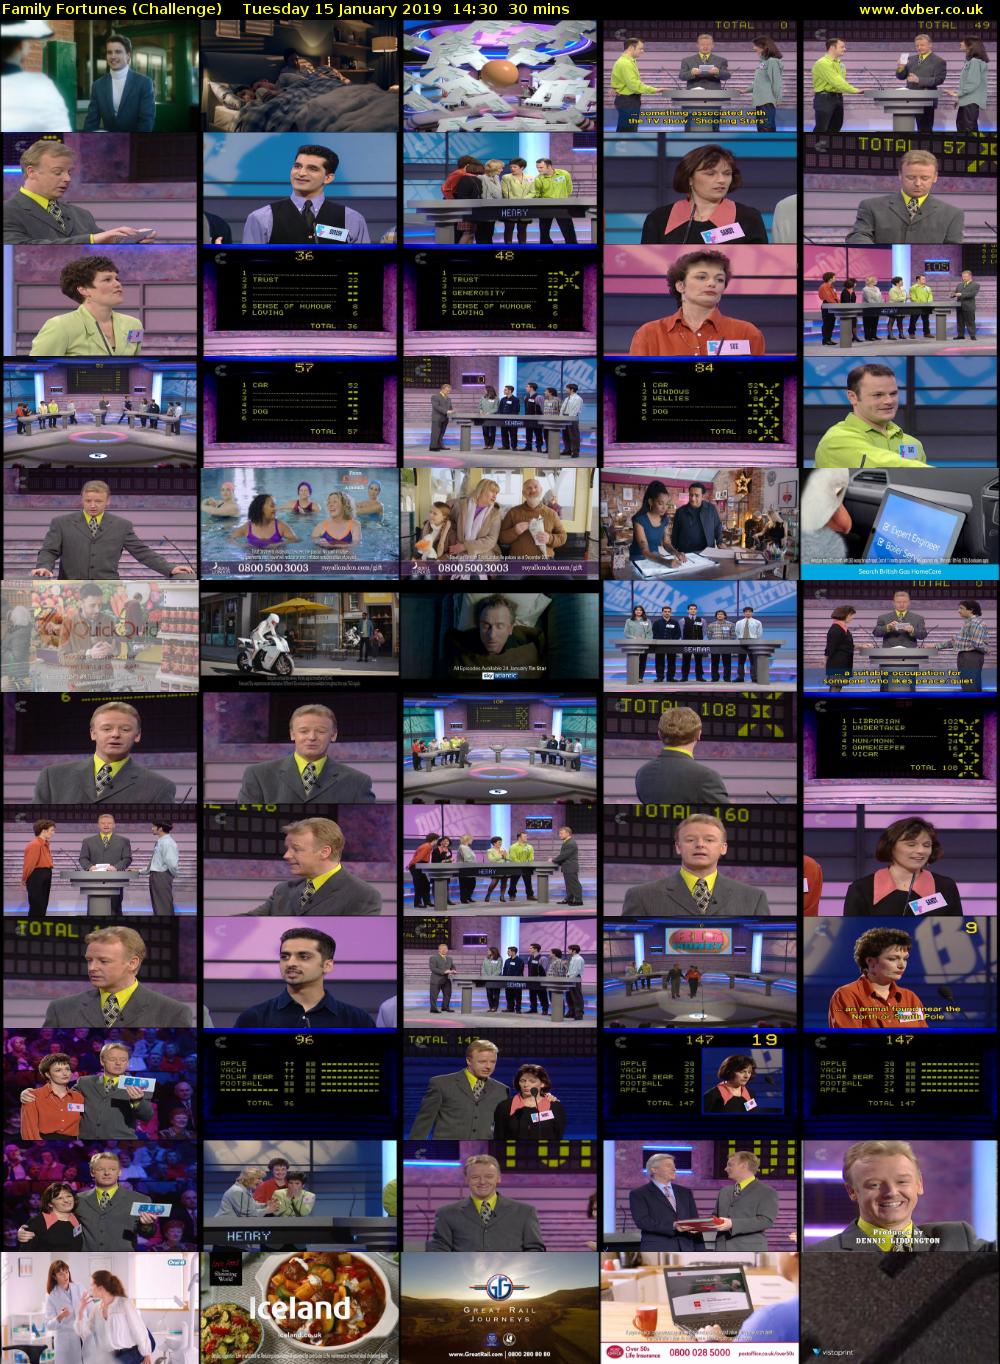 Family Fortunes (Challenge) Tuesday 15 January 2019 14:30 - 15:00